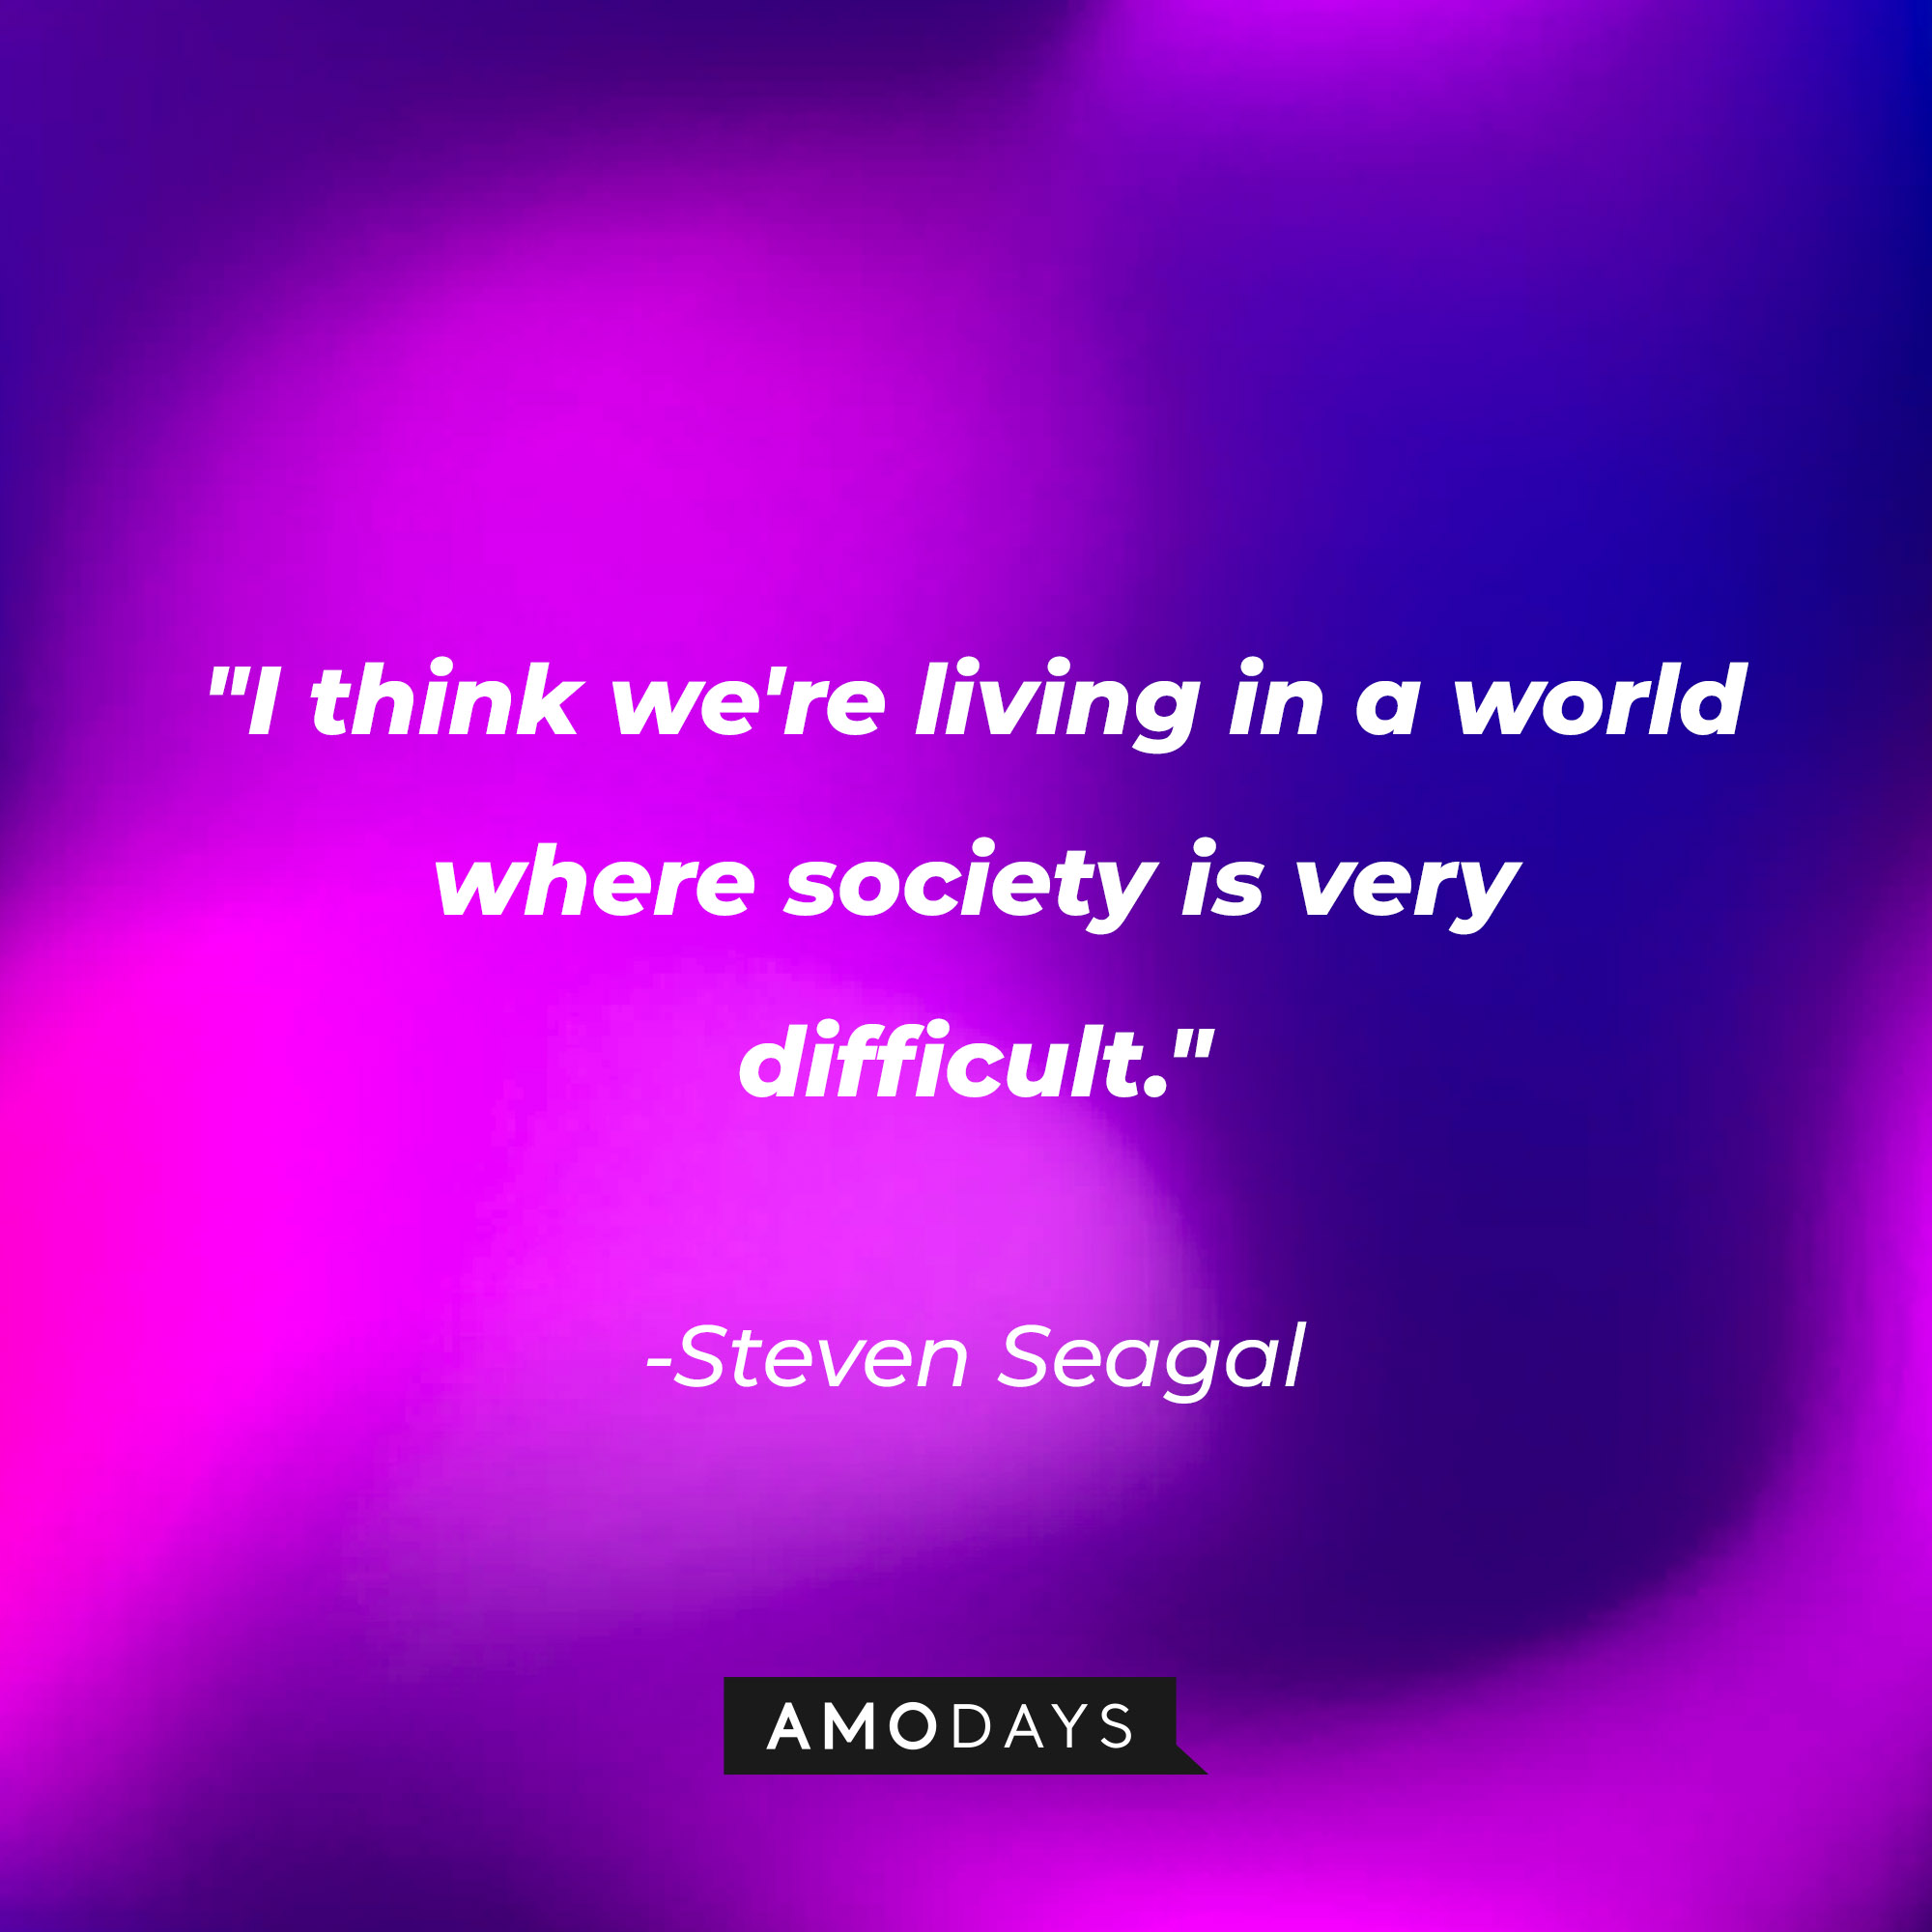 Steven Seagal’s quote: "I think we're living in a world where society is very difficult." | Image: AmoDays